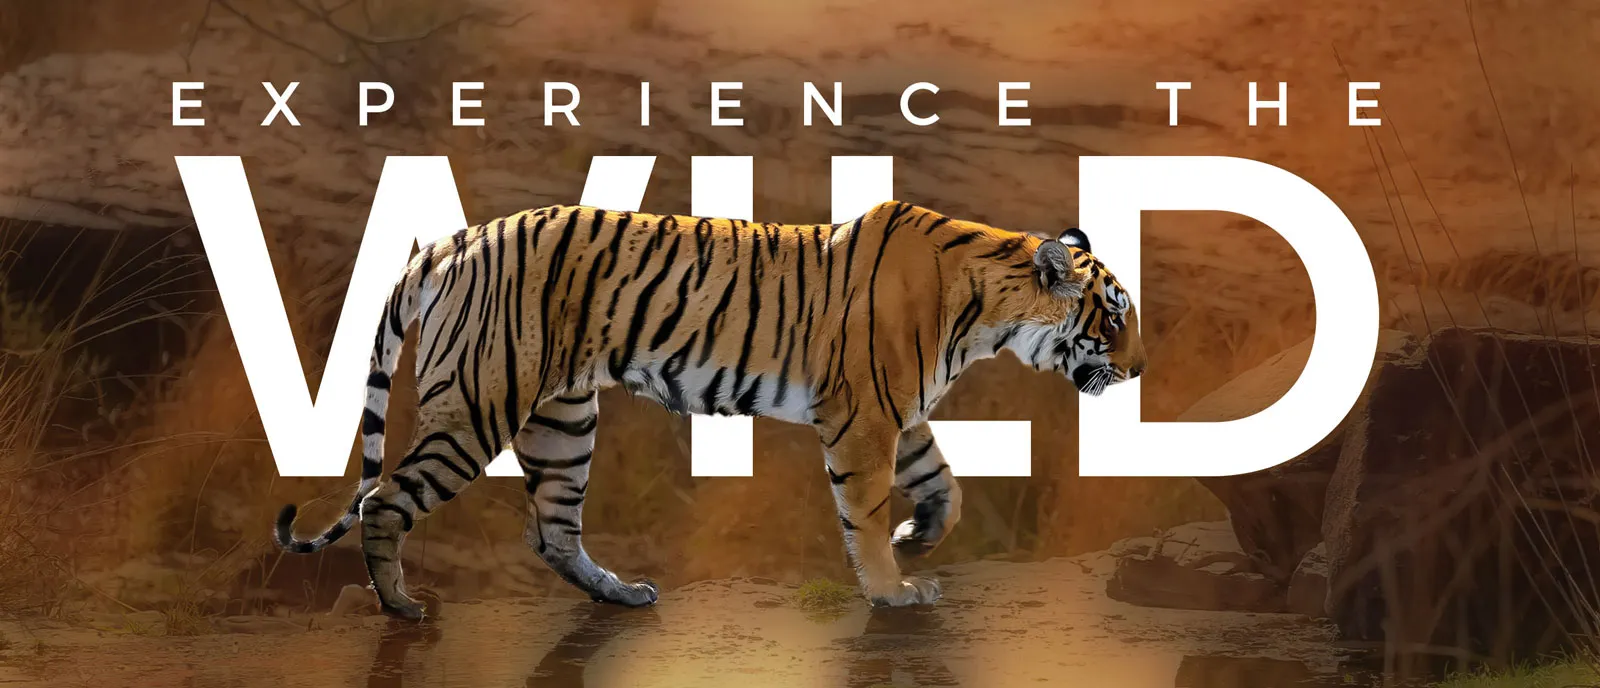 Ranthambore is home to tigers and you can witness them in their natural habitat during Ranthambore tiger safari